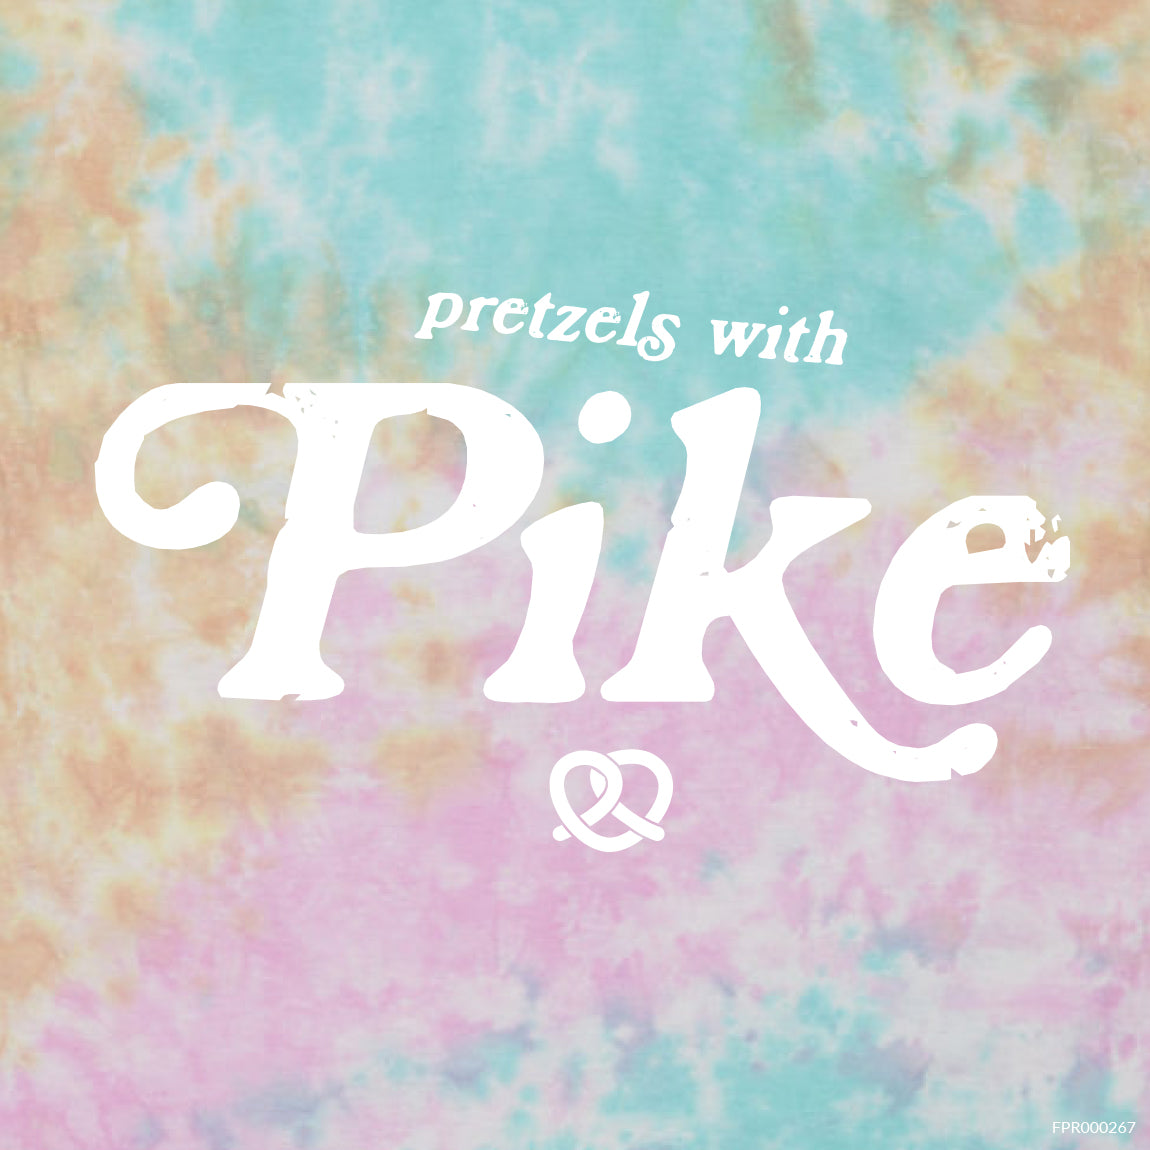 Pretzels with Pike